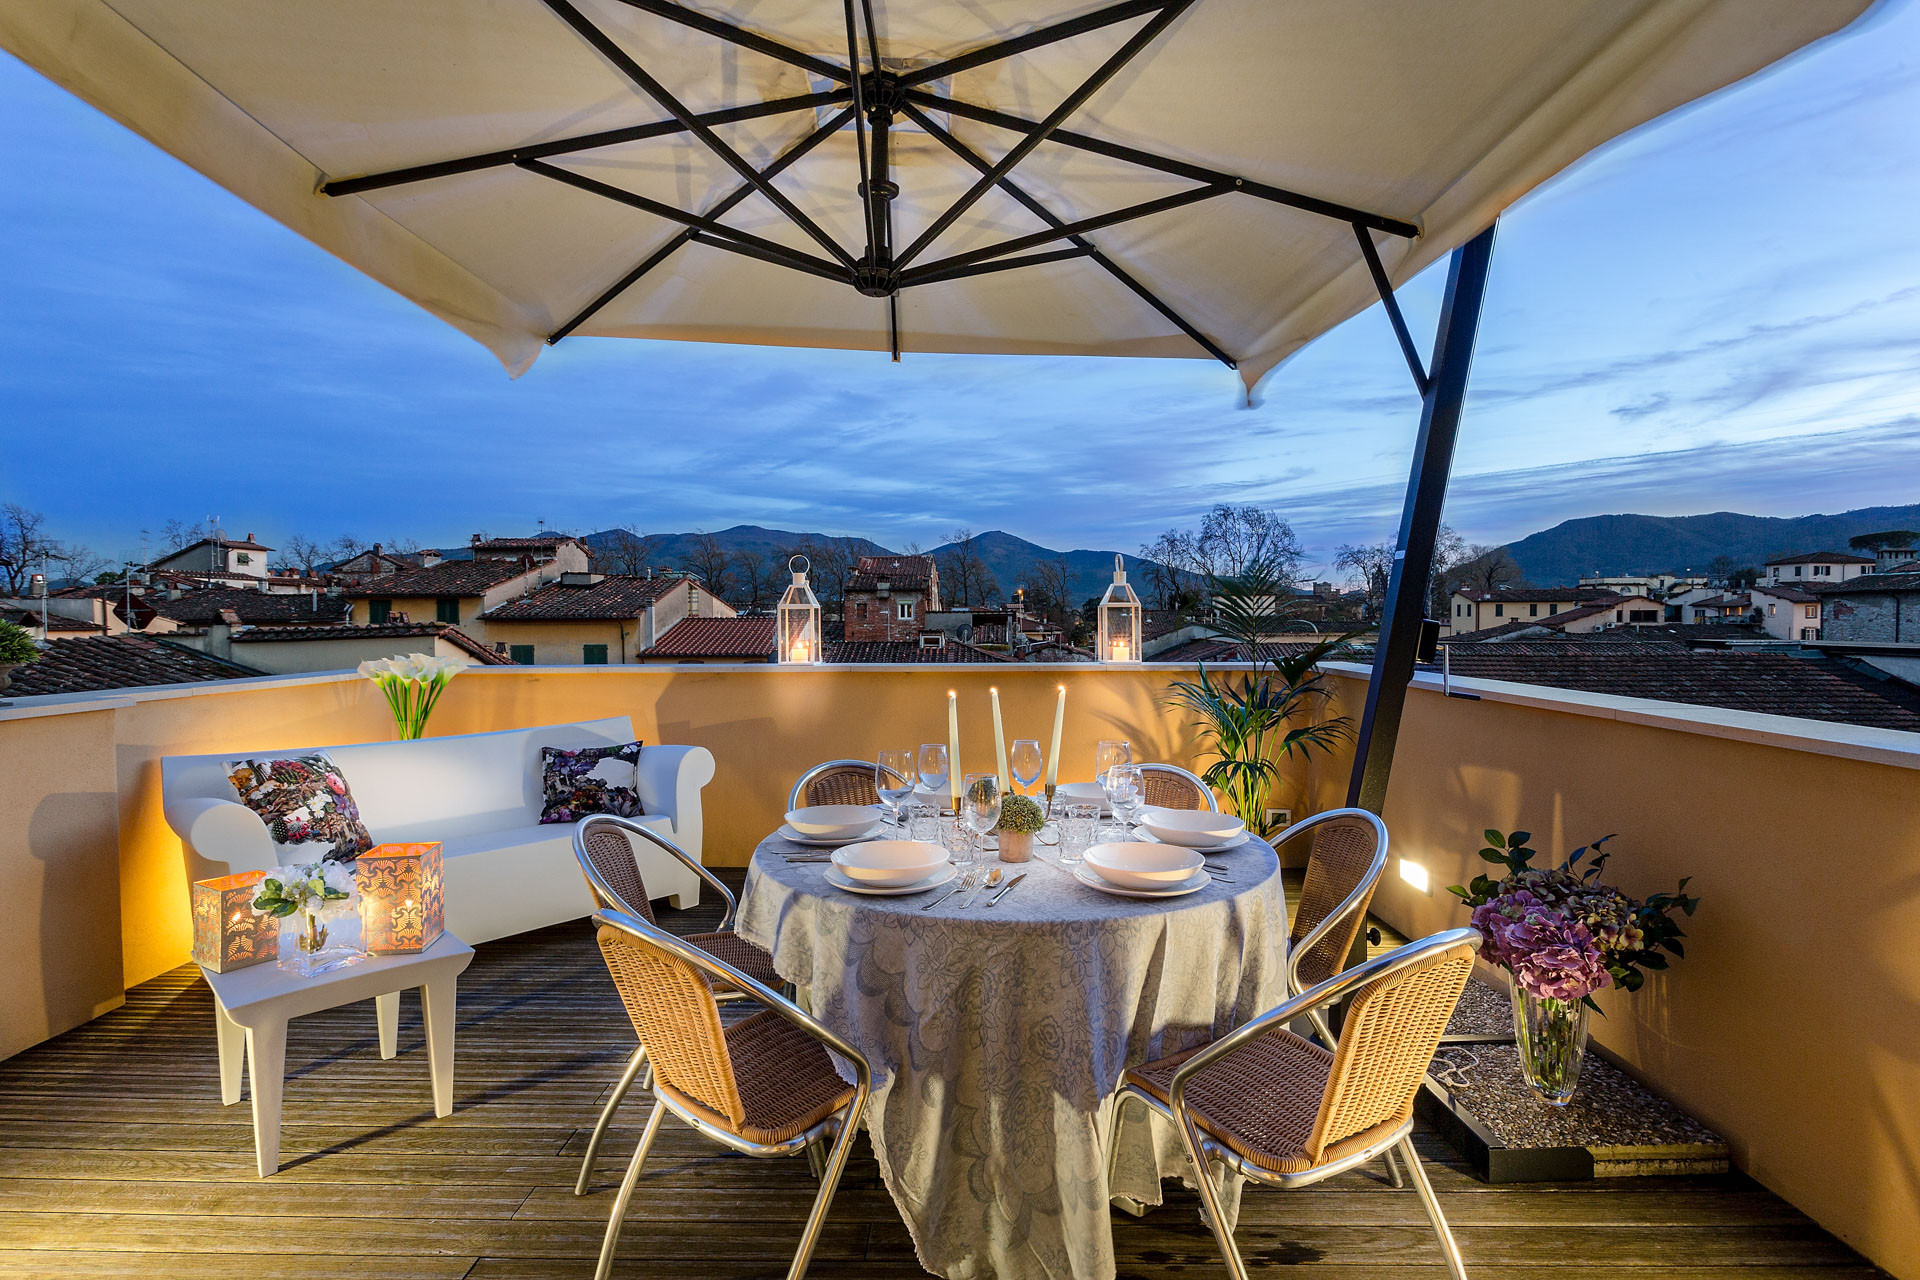  a Lucca - Breathtaking Views of Lucca from a Spacious Furnished Terrace inside the Walls